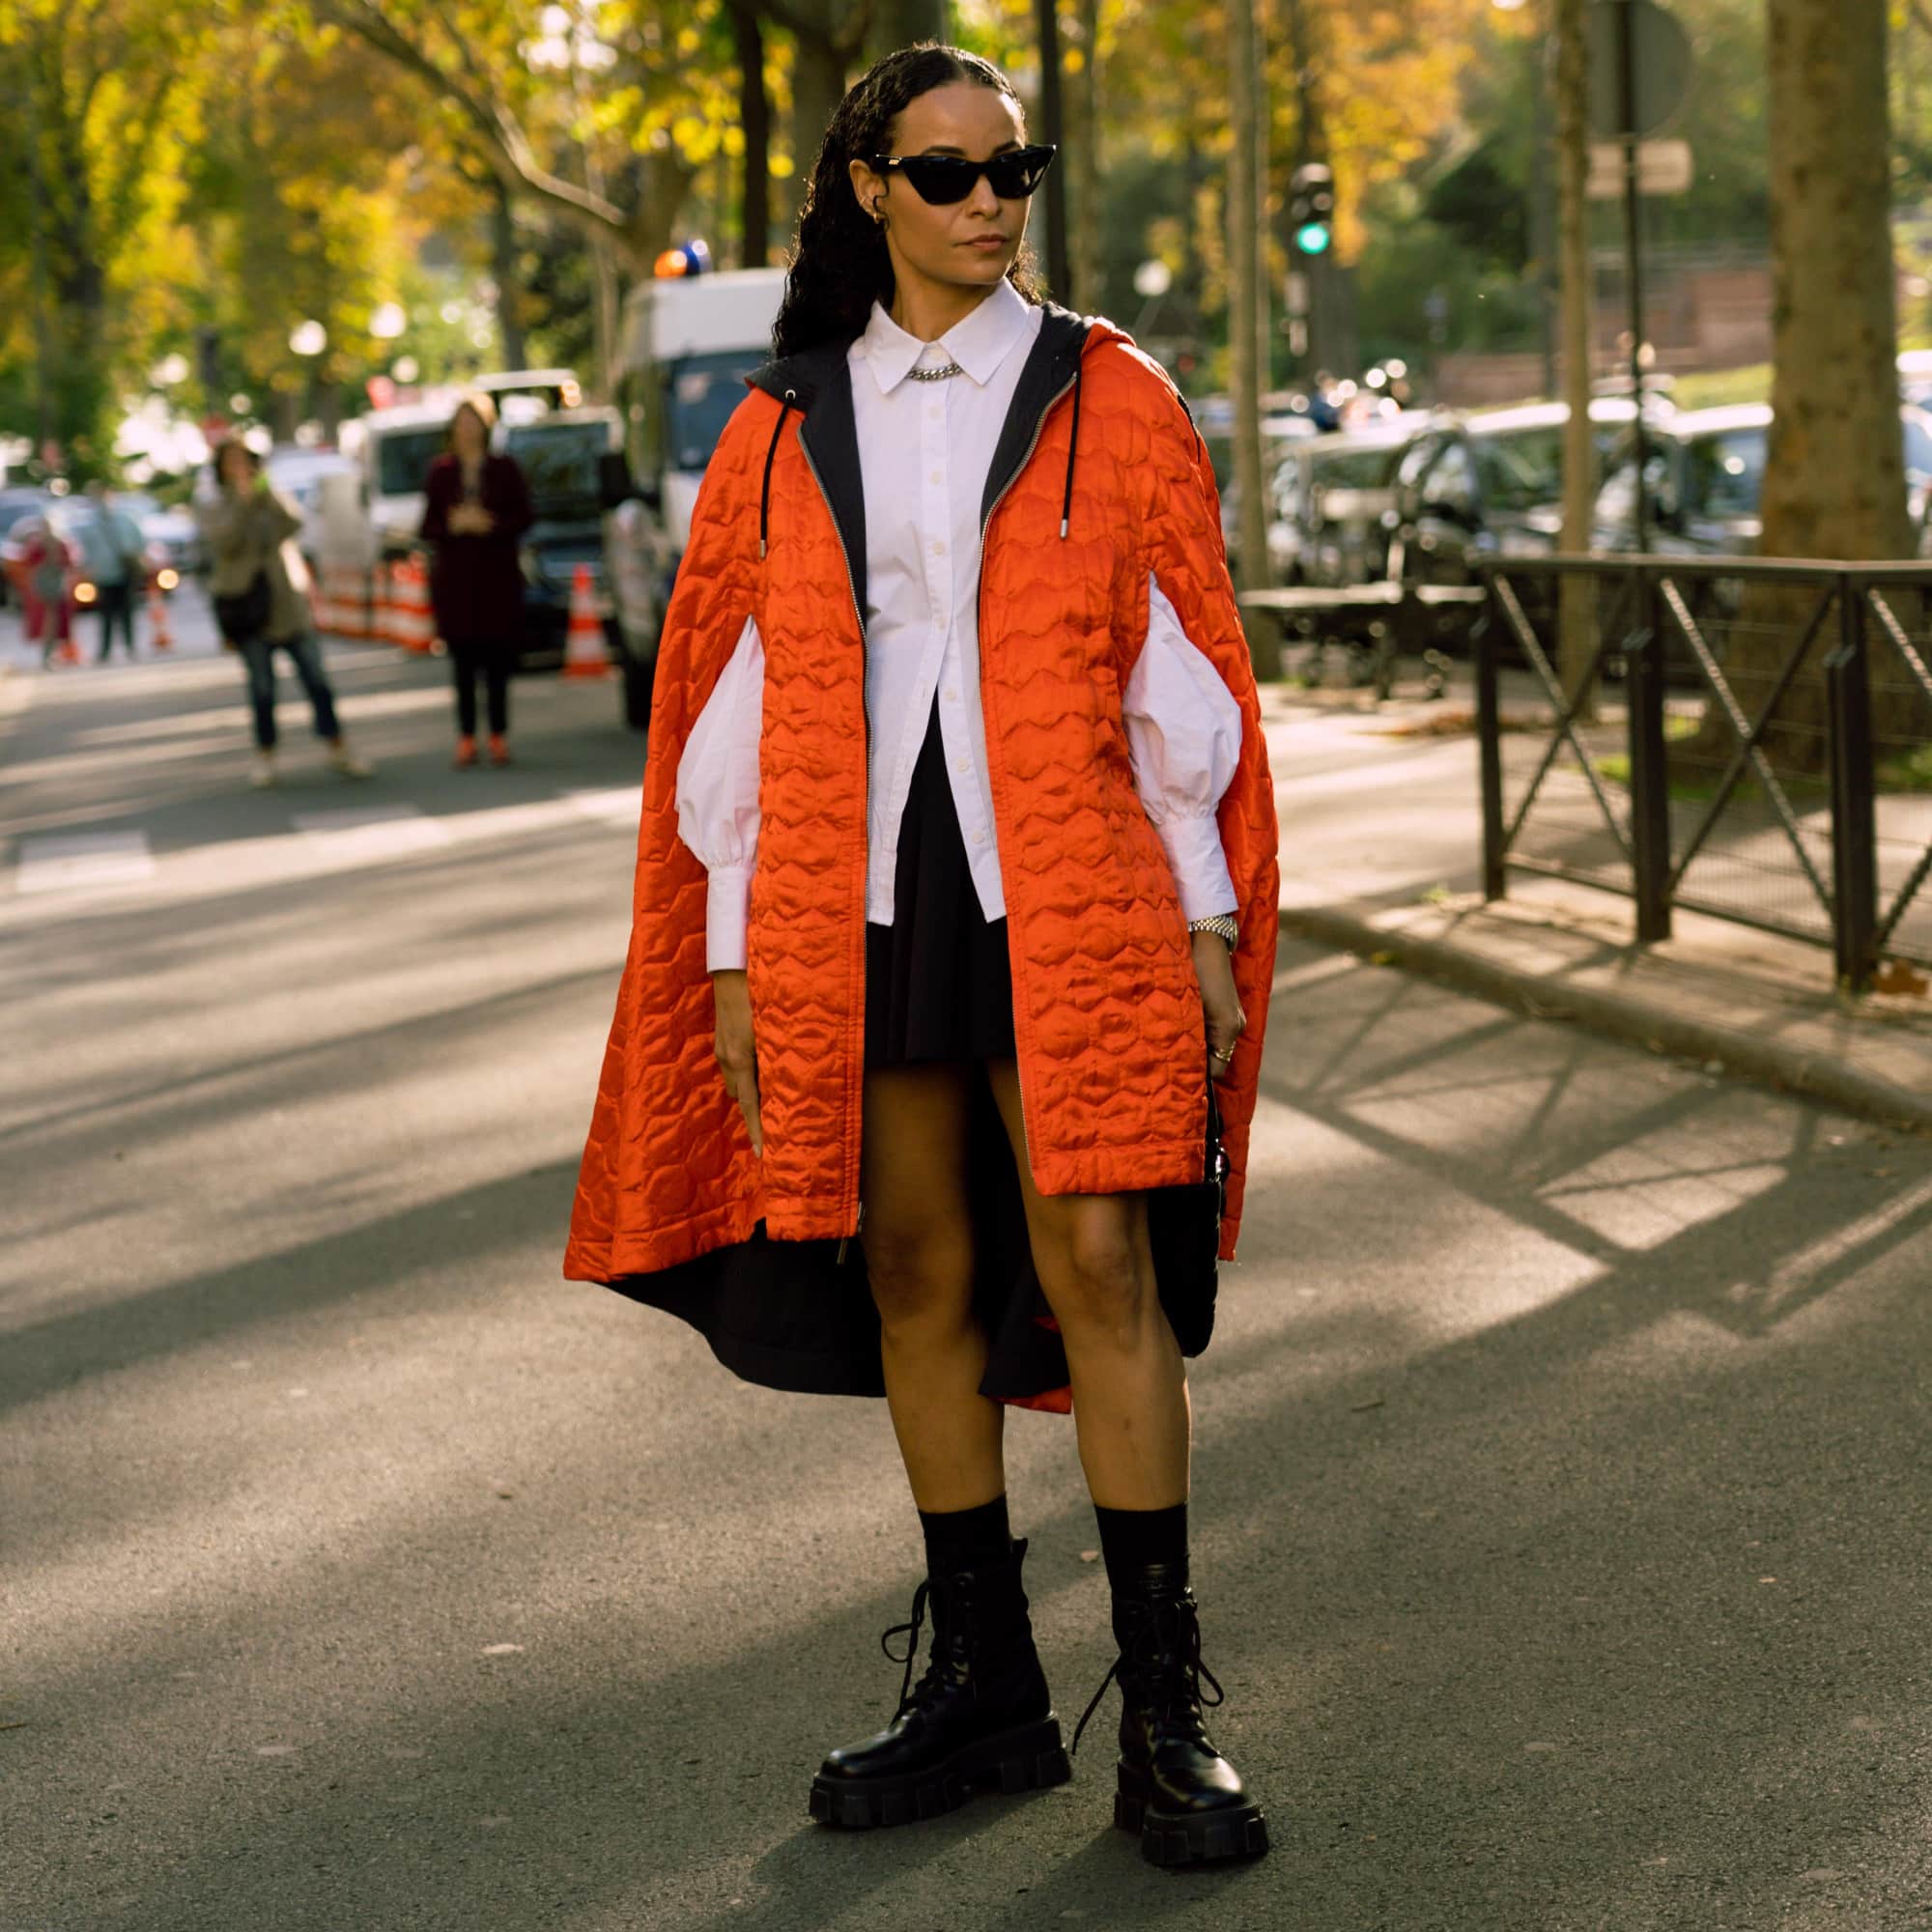 This Is Where They Invented Chic See The Best Street Style From Paris Fashion Week Popsugar